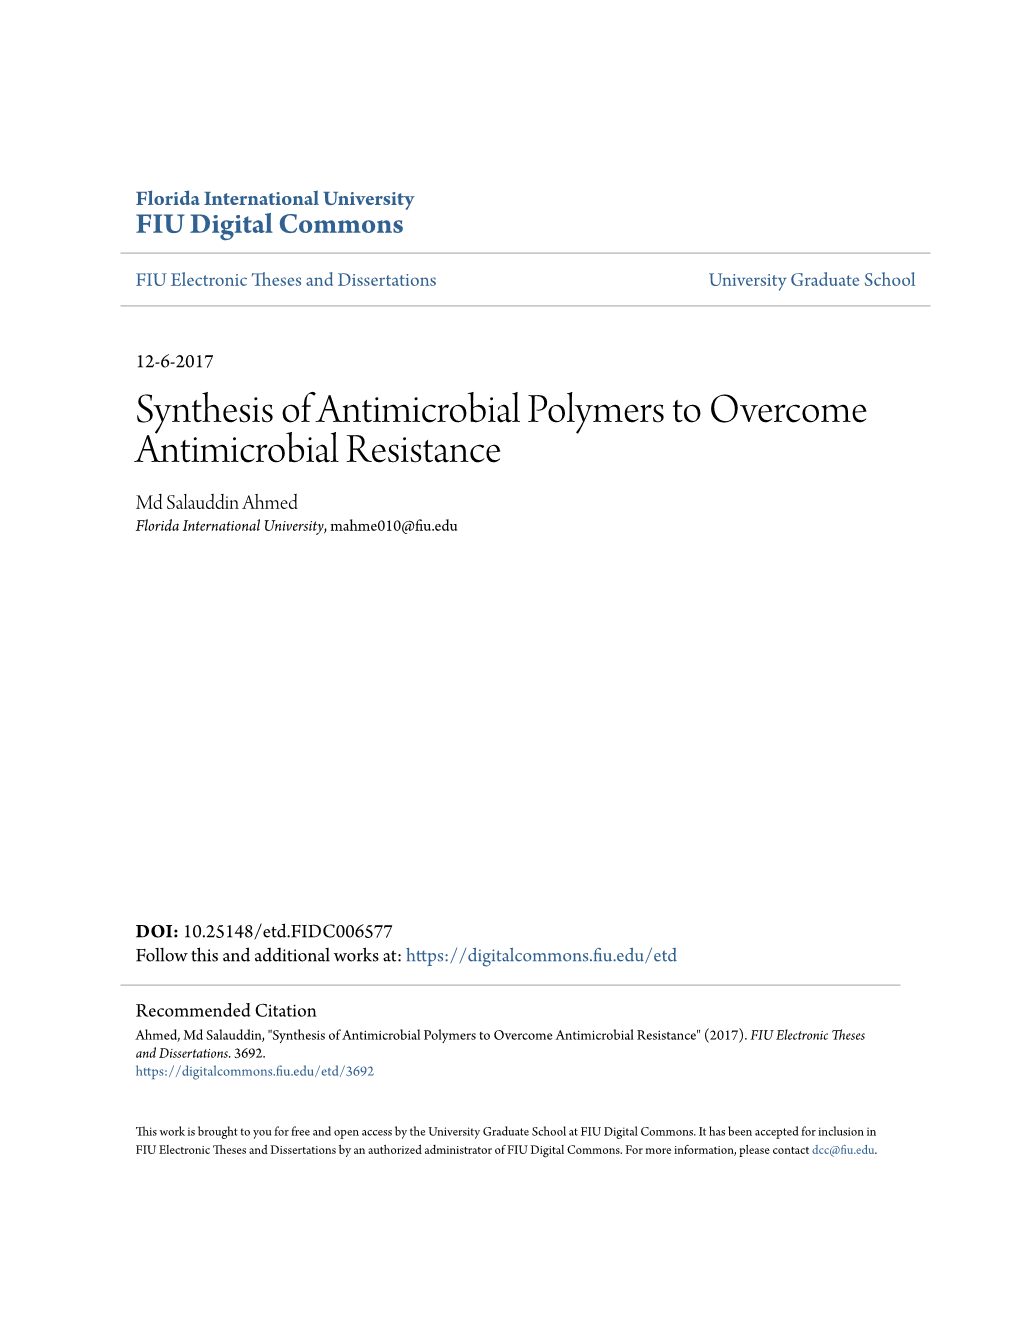 Synthesis of Antimicrobial Polymers to Overcome Antimicrobial Resistance Md Salauddin Ahmed Florida International University, Mahme010@Fiu.Edu